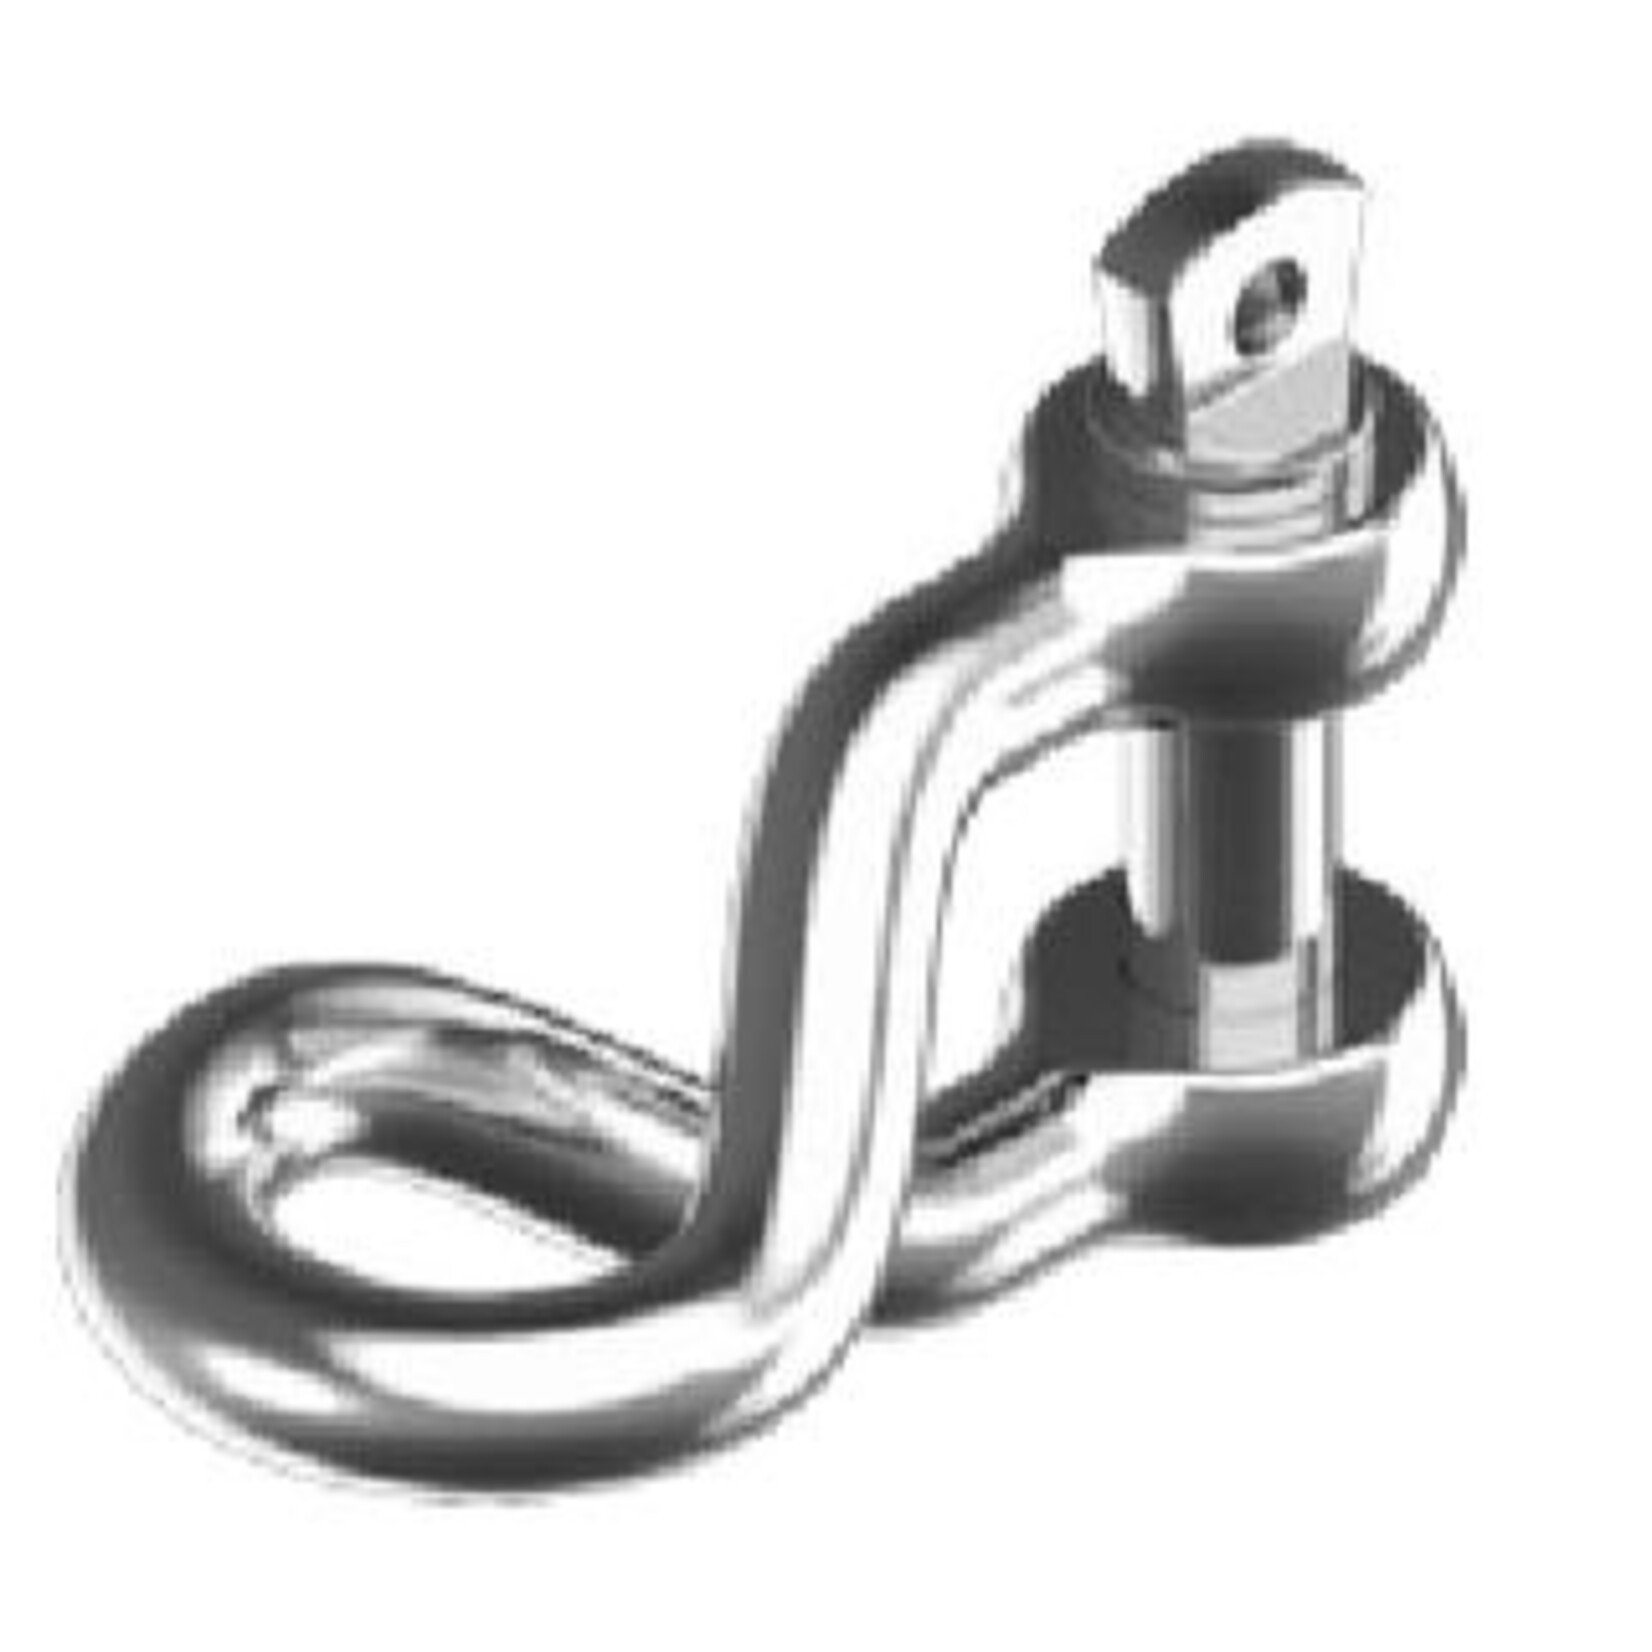 Stainless twisted shackle 8mm 10 pcs